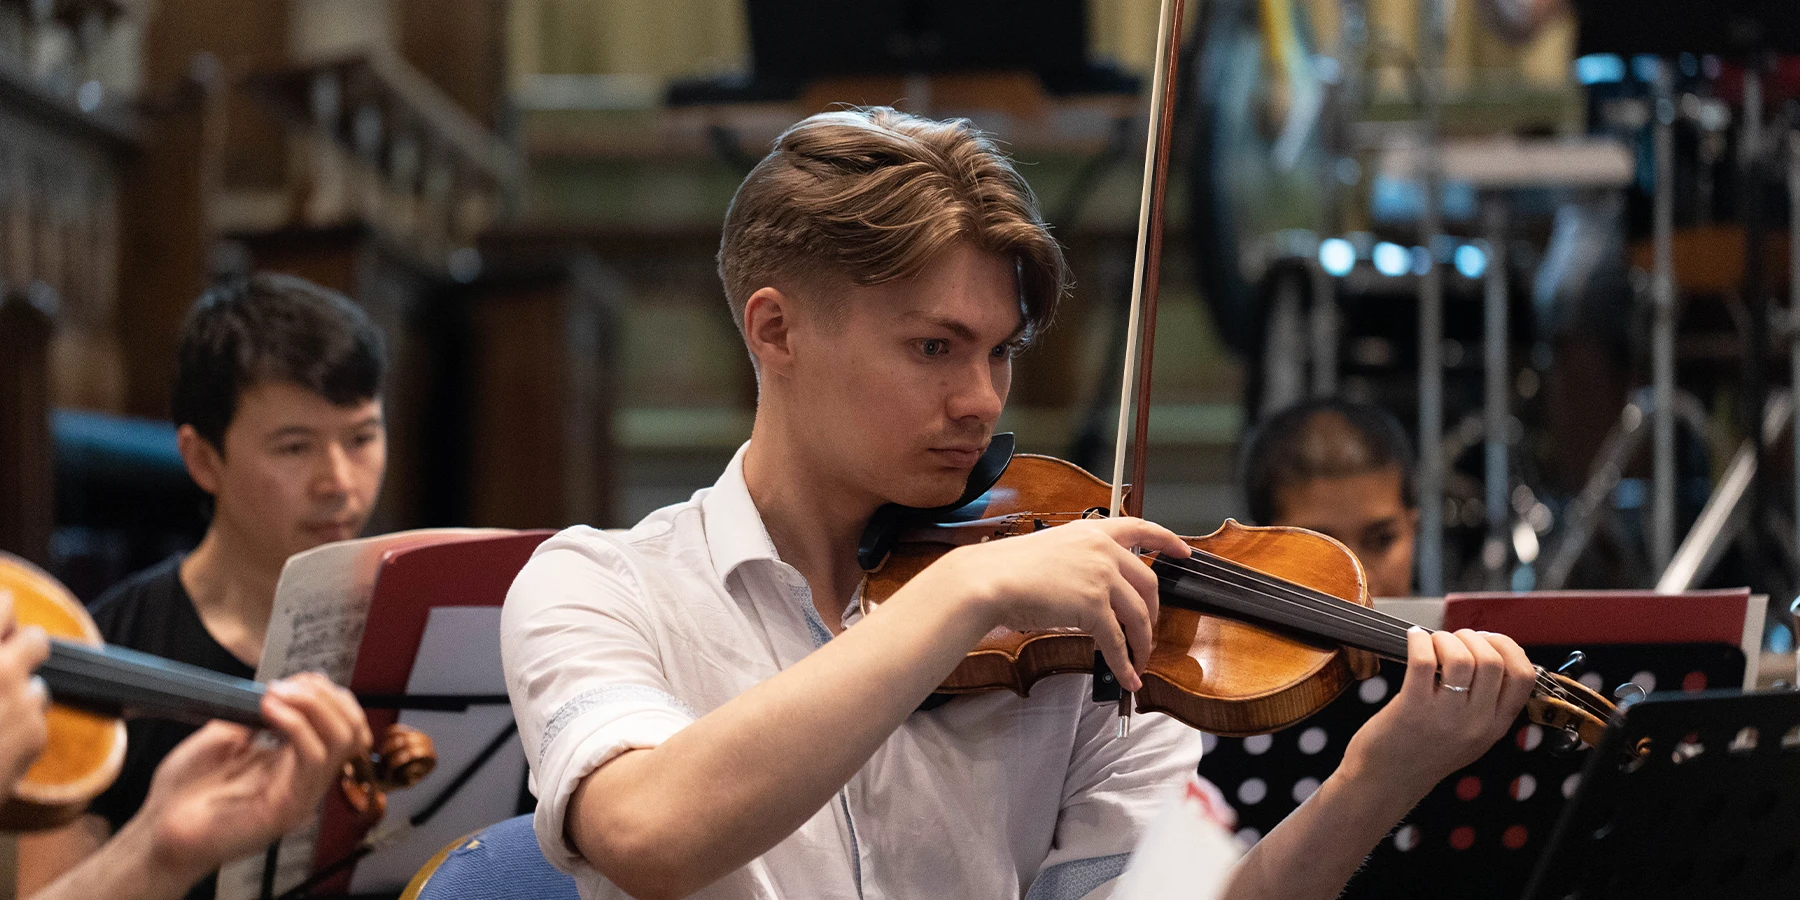 JAM Sinfonia performs Strauss waltzes and Haydn, arranged by Arnold Schoenberg, Alban Berg and Anton Webern, members of the Second Viennese School at JAM on the Marsh.